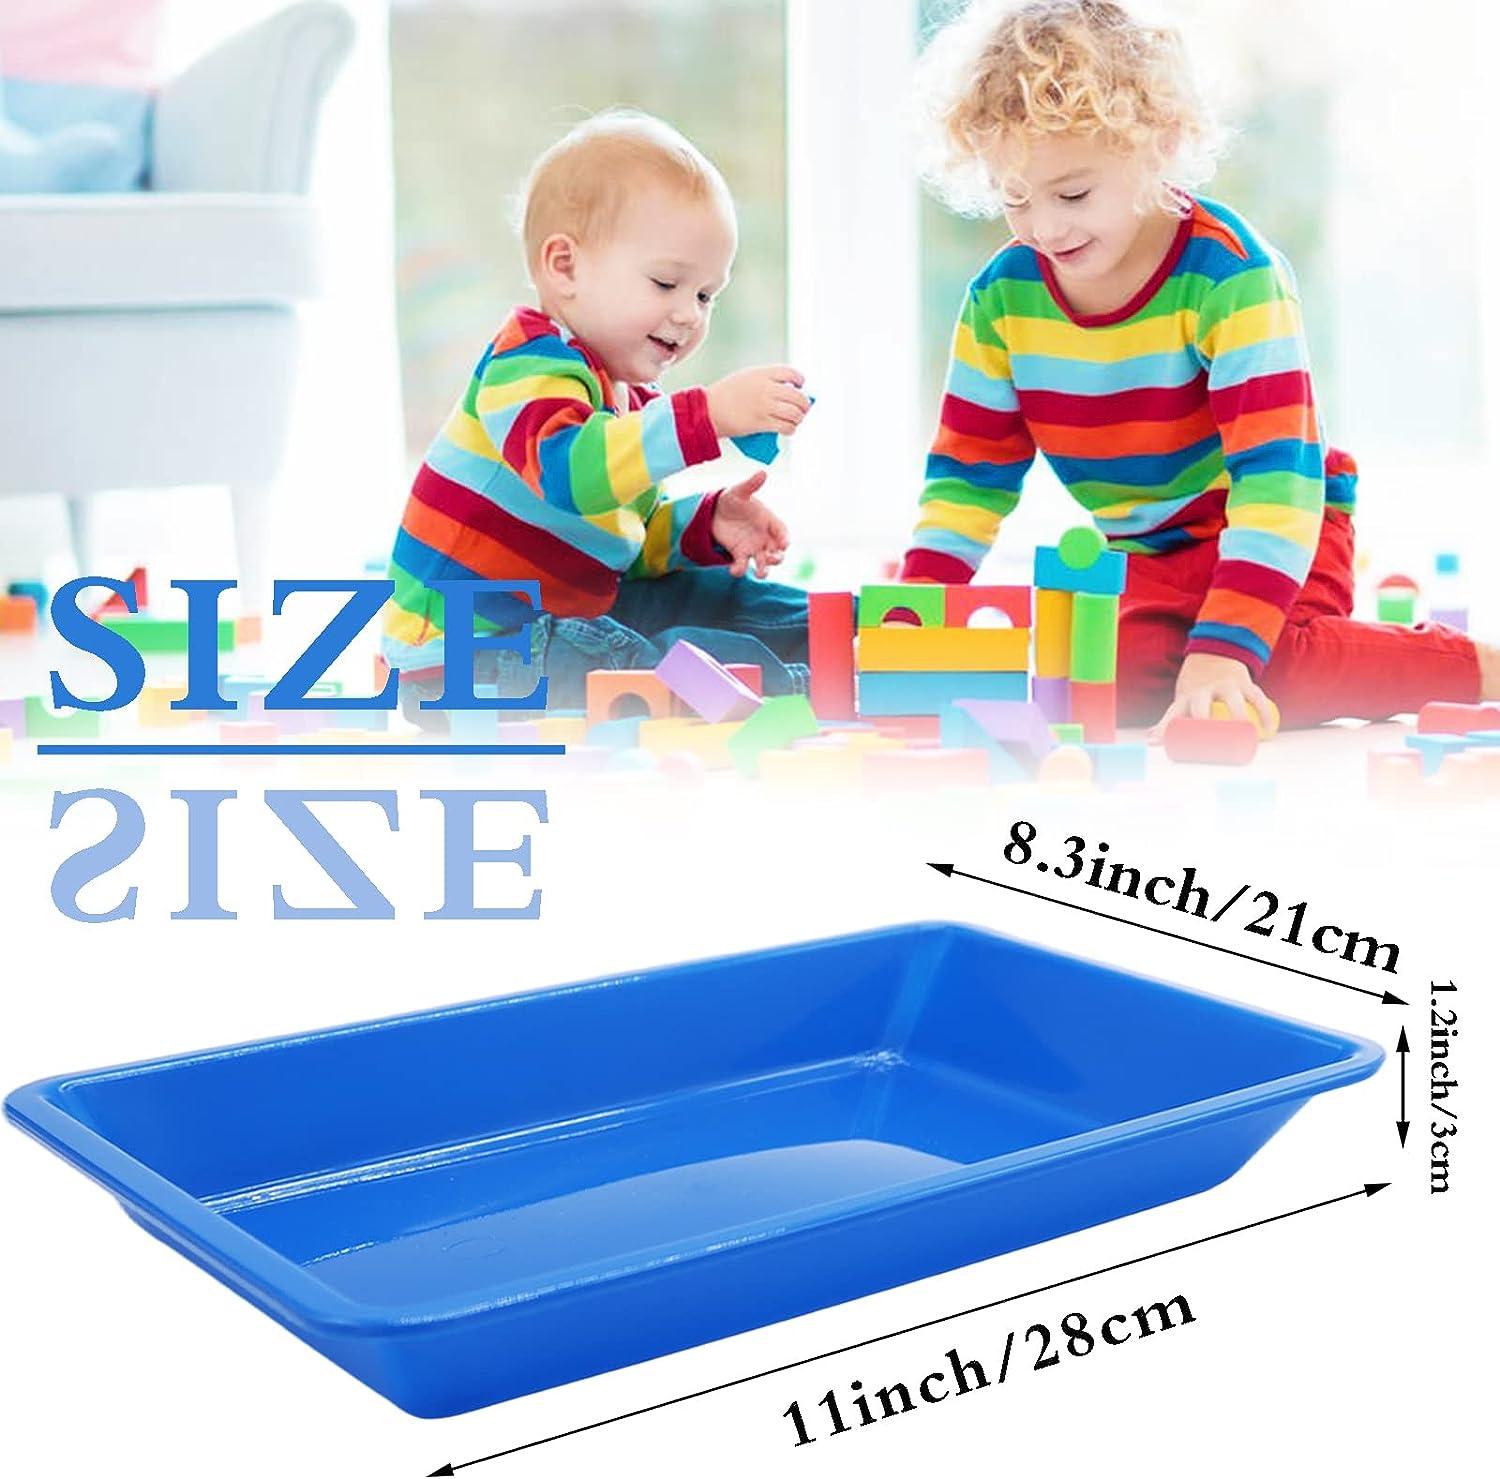 10 Pack Activity Plastic Art Trays Crafts Organizer Tray Multicolor Serving  Trays for DIY Projects Painting Beads